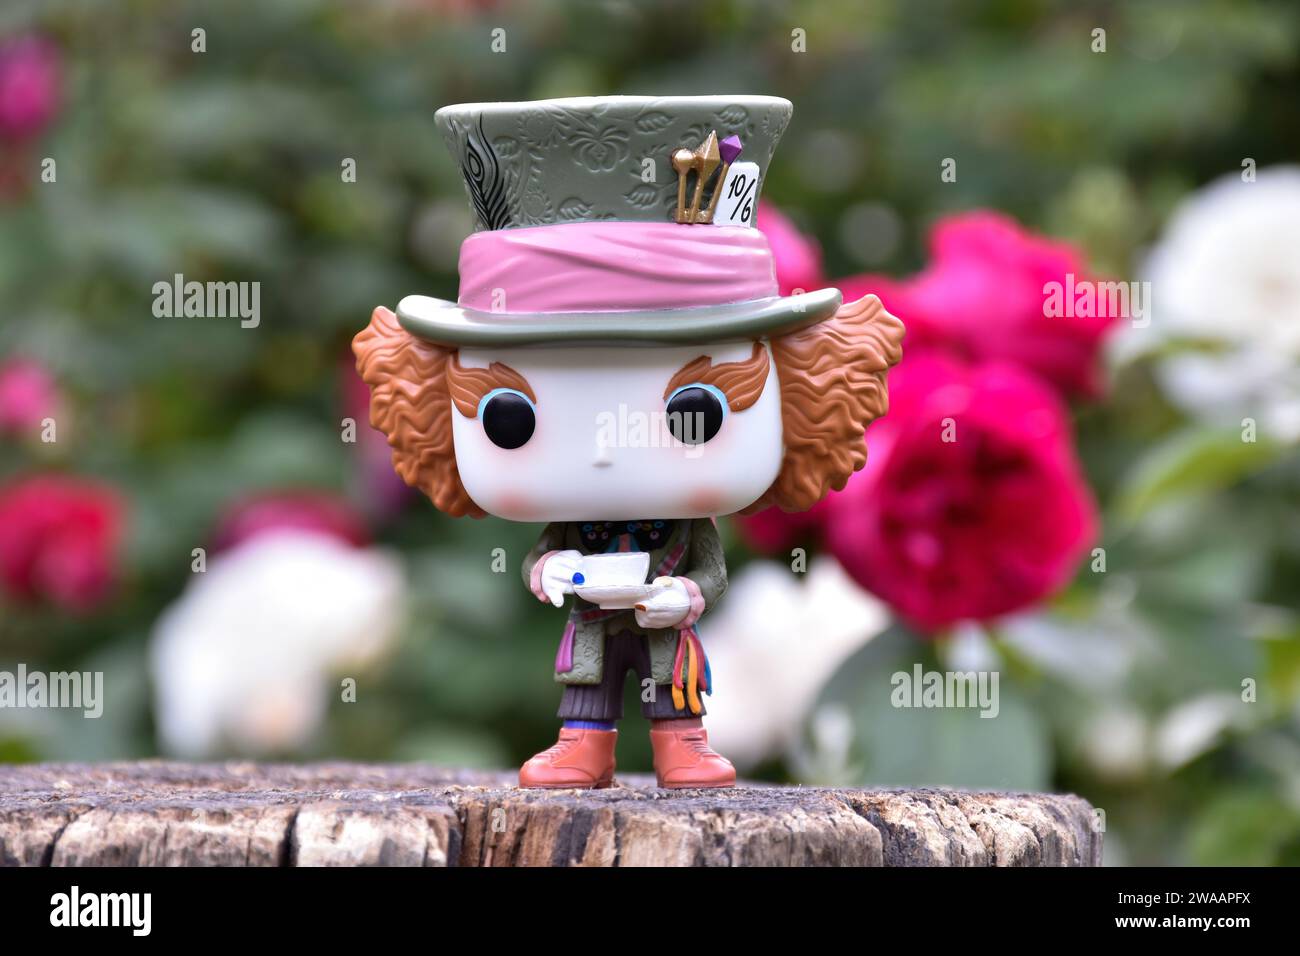 Funko Pop action figure of Mad Hatter from Tim Burton fantasy movie Alice in Wonderland. Red and white roses, green leaves, garden, wooden stump. Stock Photo